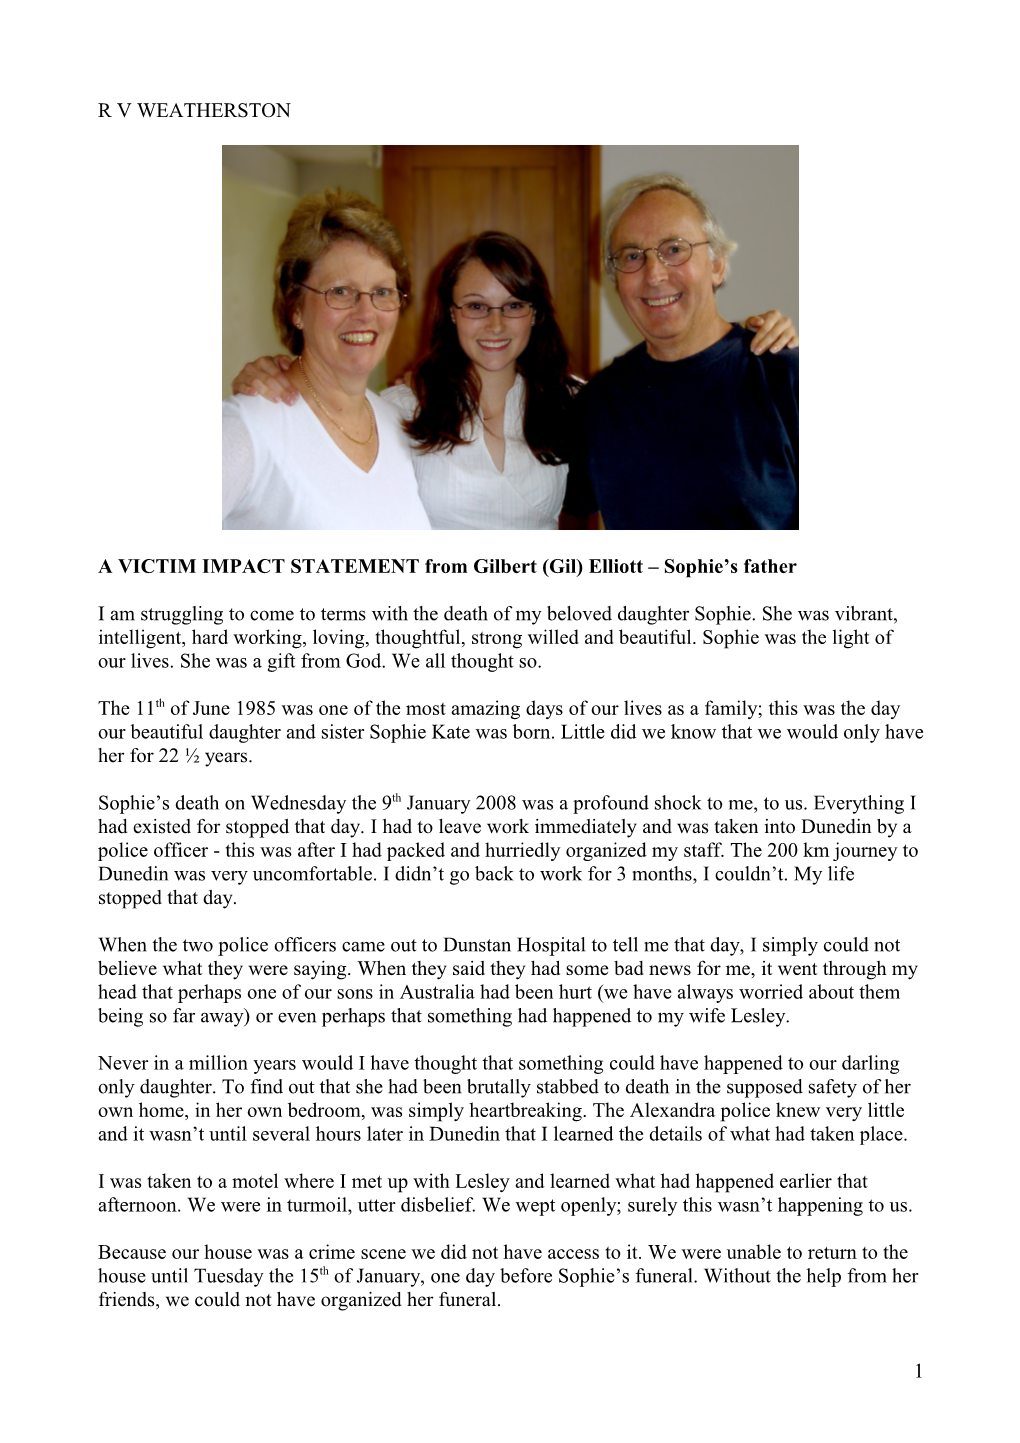 A VICTIM IMPACT STATEMENT from Gilbert (Gil) Elliott Sophie S Father